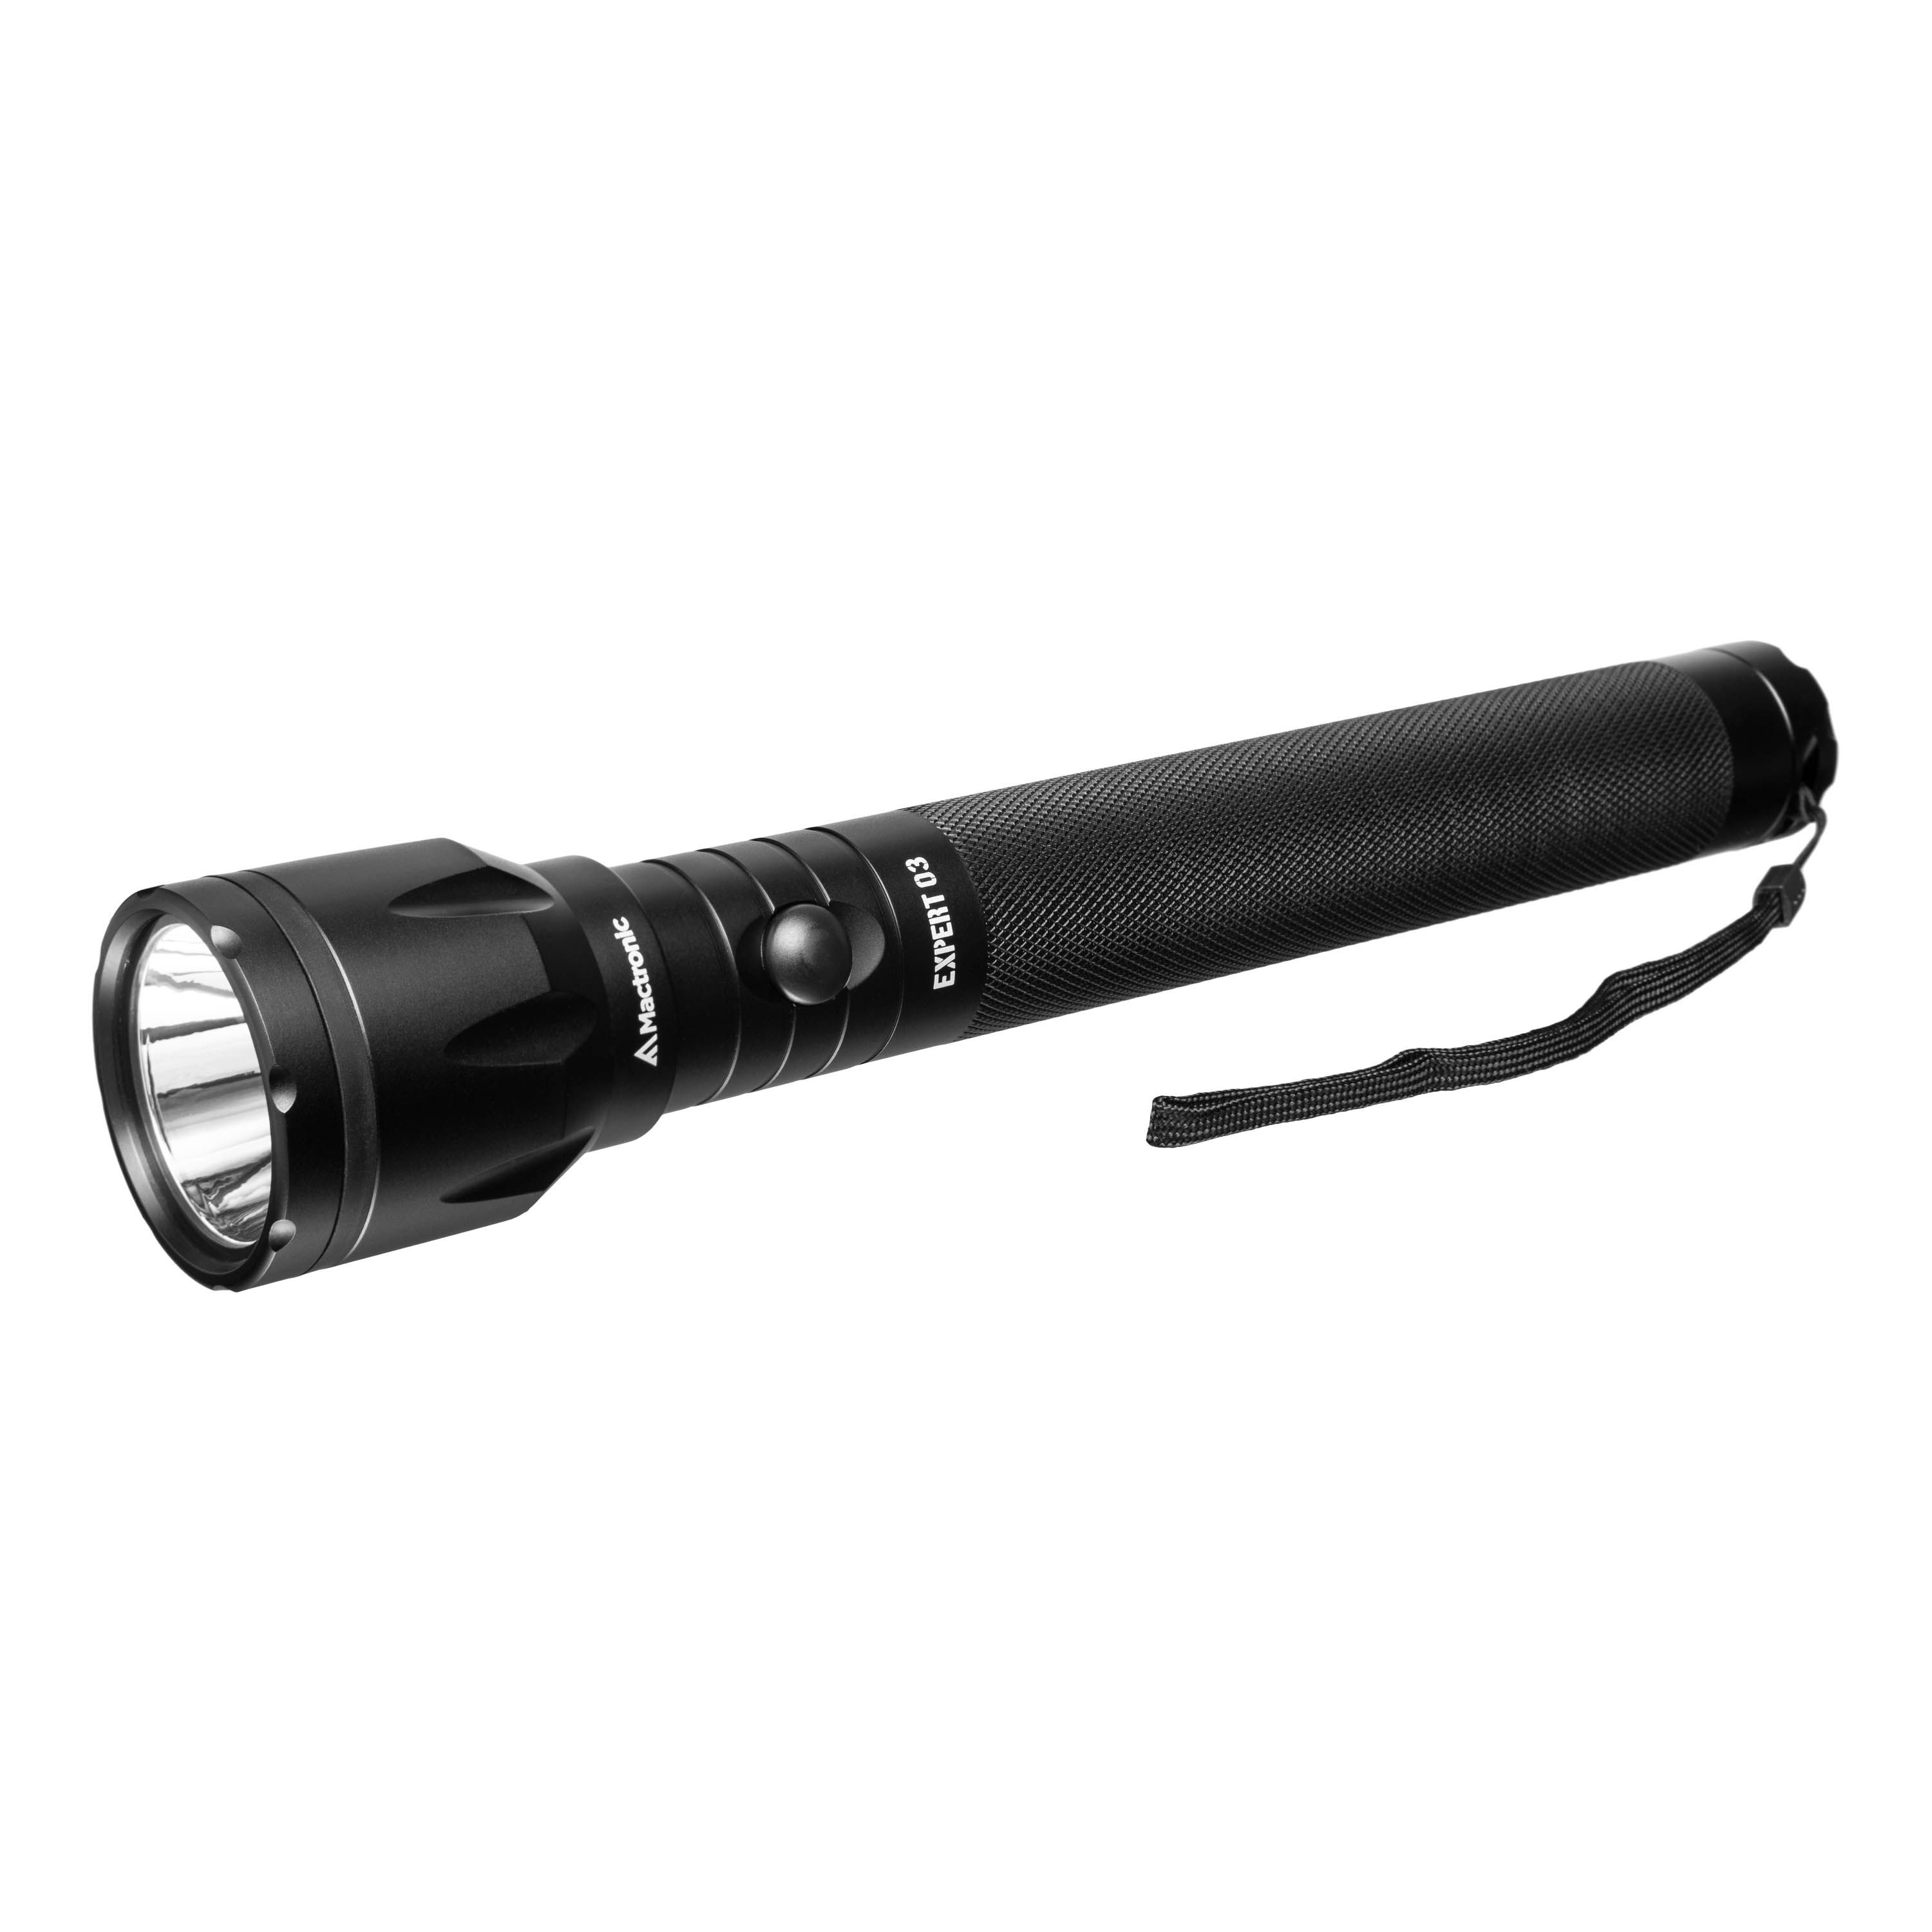 3 Cell battery full size duty flashlight with exceptional operational time, 300 lm